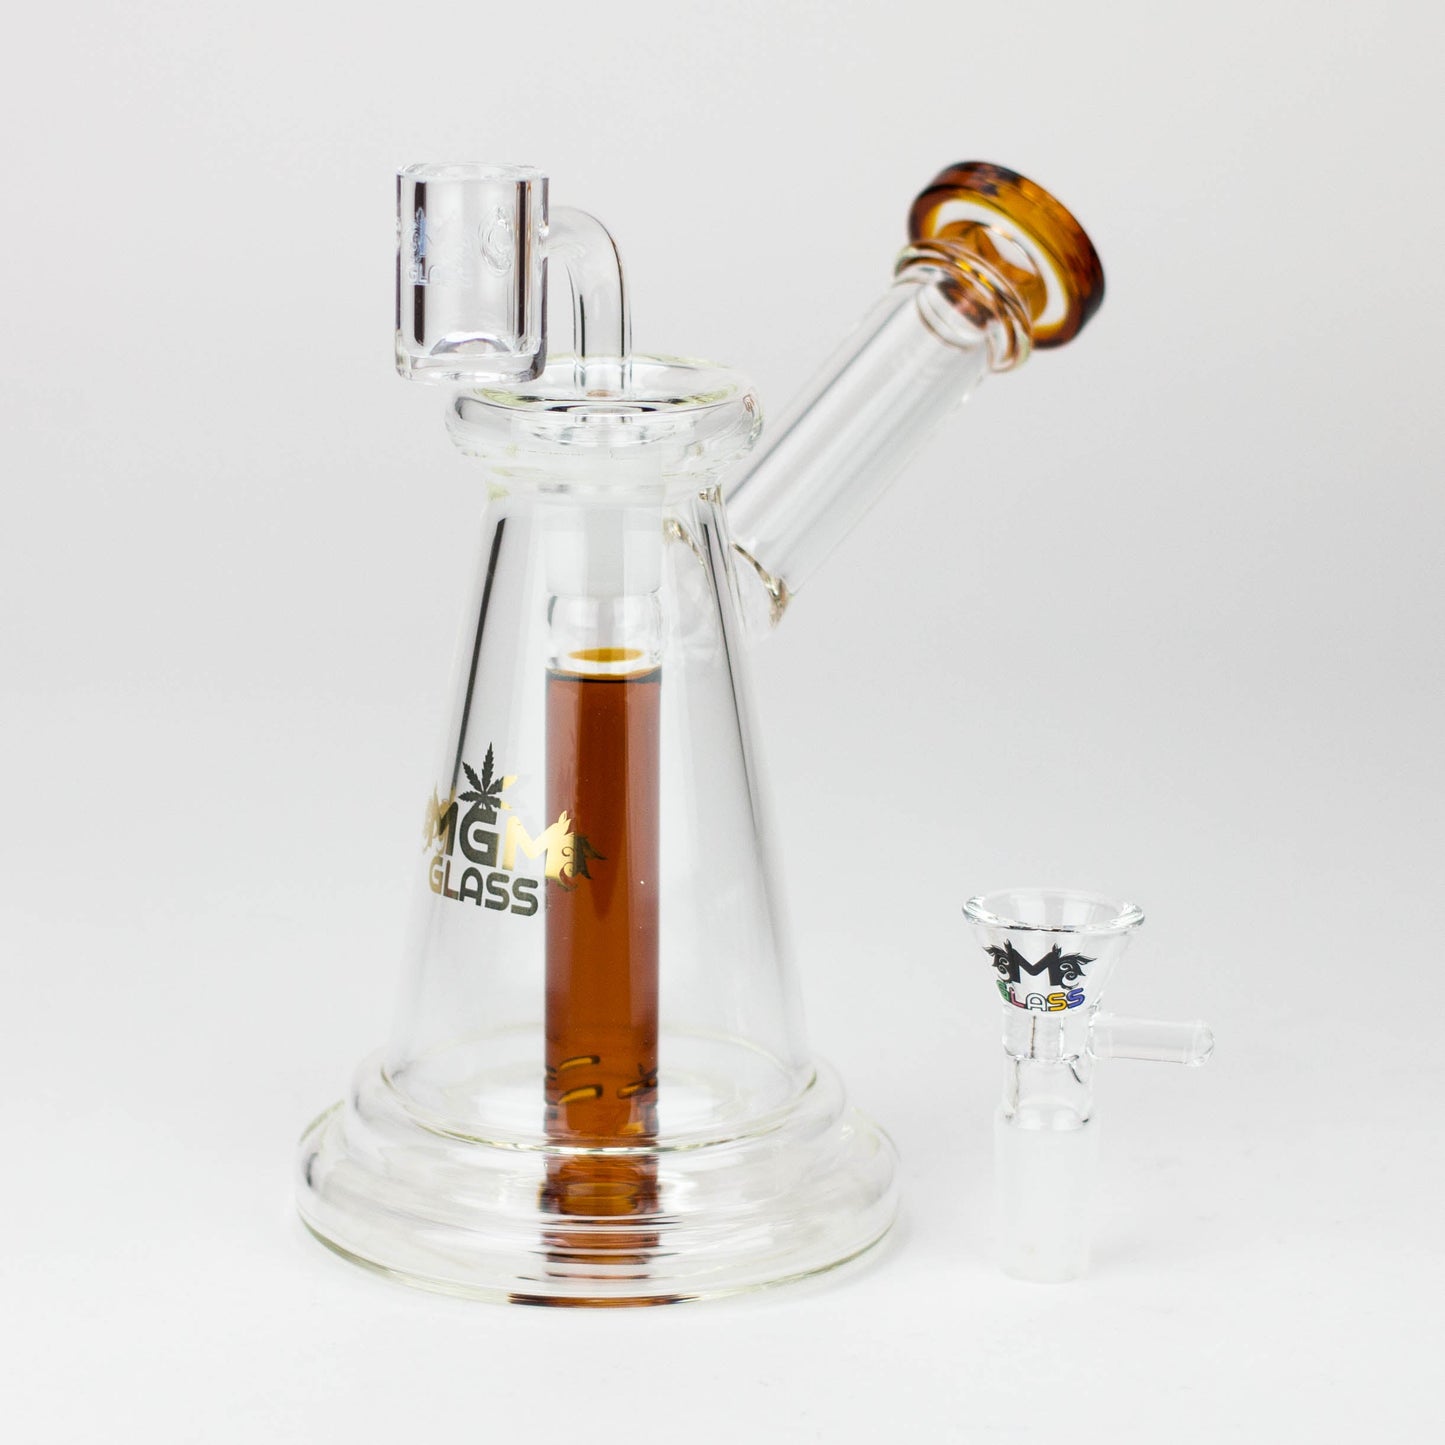 5.7" MGM Glass 2-in-1 bubbler with logo [C2676]_6